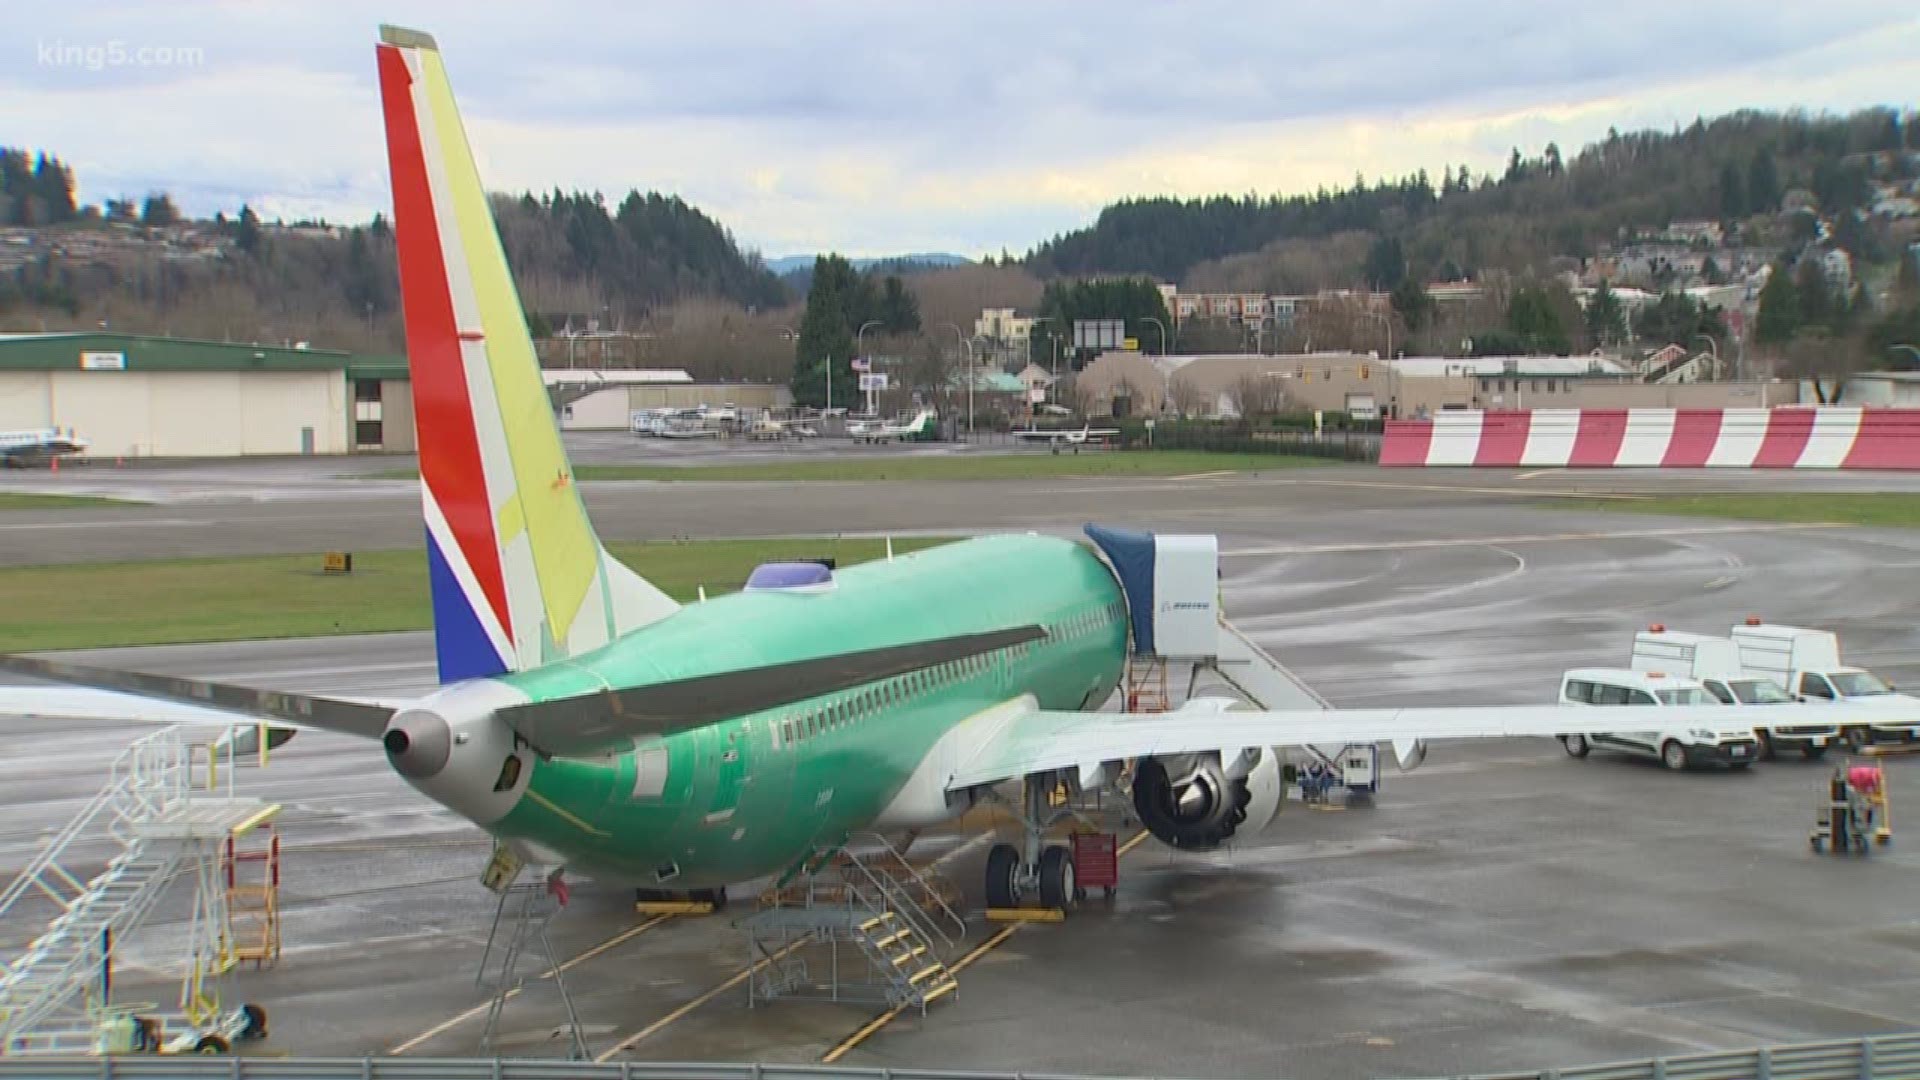 About 3,000 workers primarily in manufacturing, engineering, and fabrication will be temporarily moved to other facilities while 737 MAX production suspends.